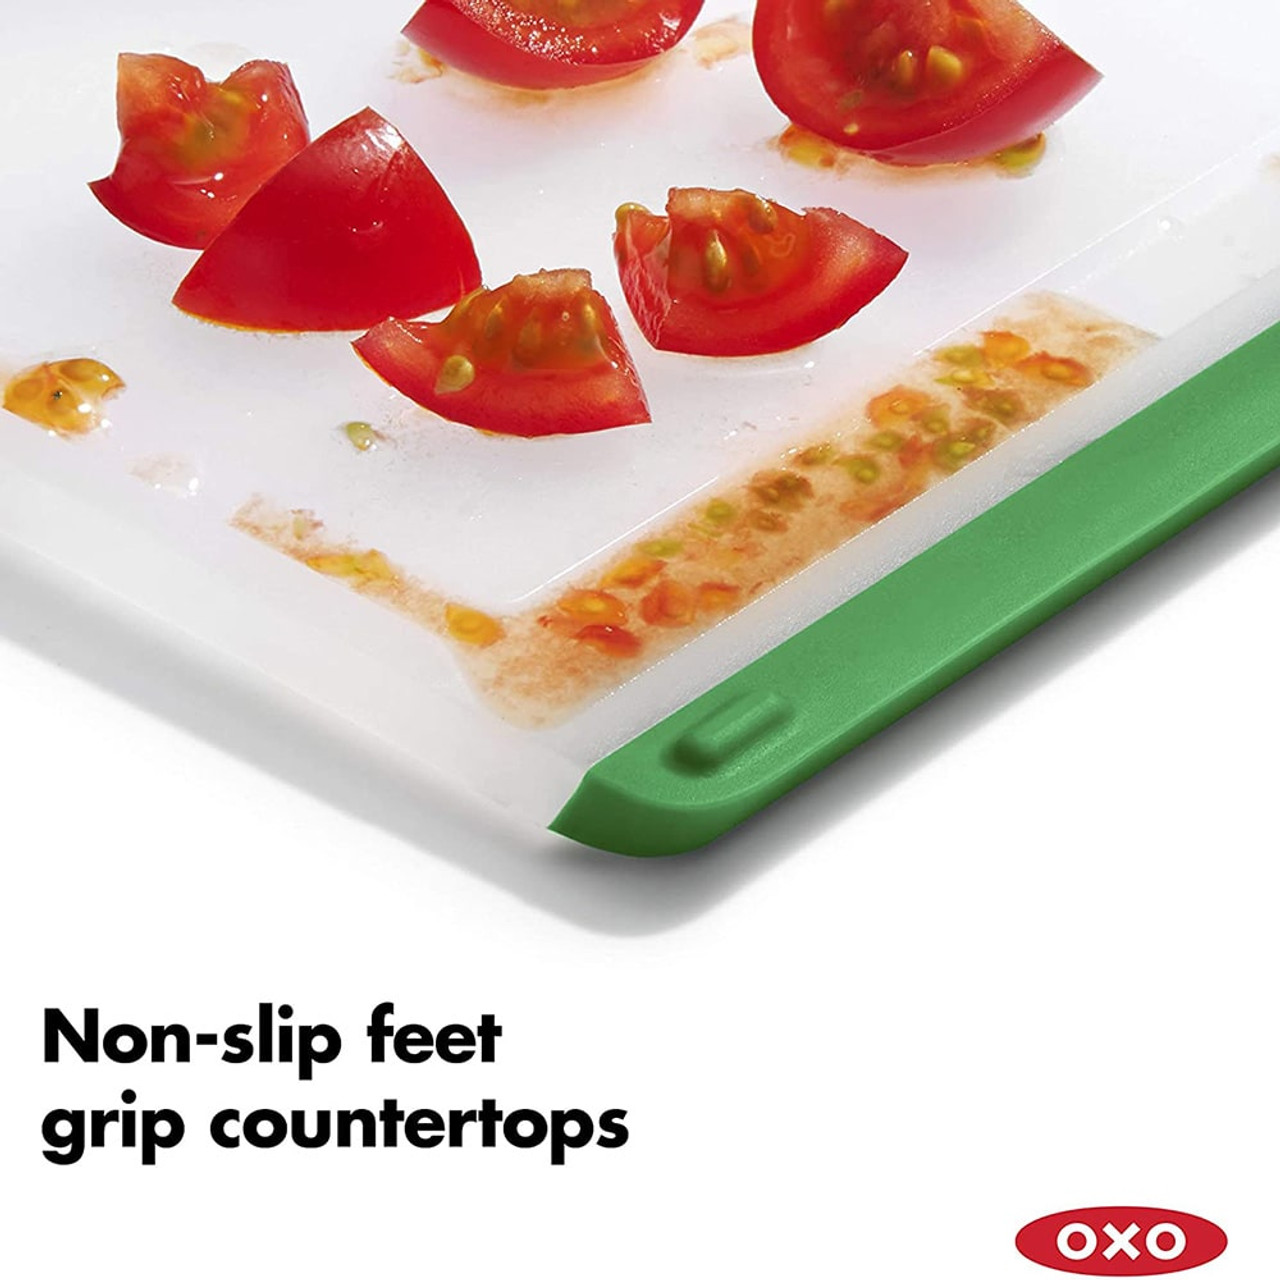 OXO Good Grips Utility Cutting Board Review